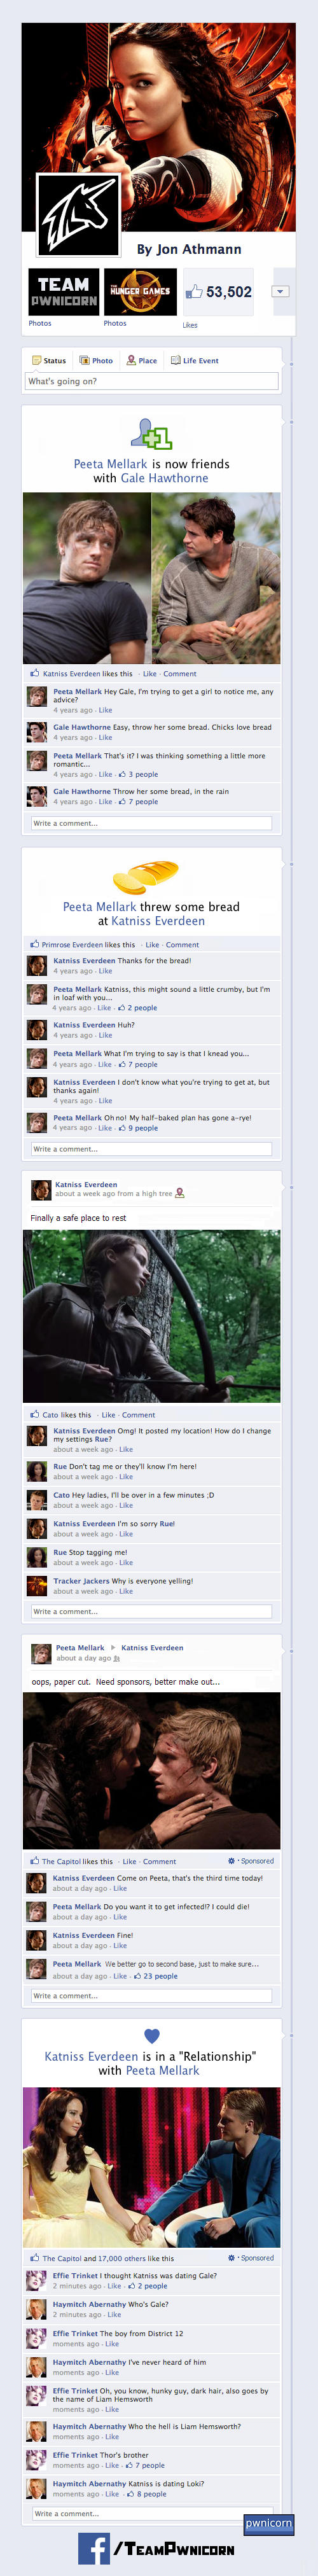 The Hunger Games Told Through Facebook -   Misc